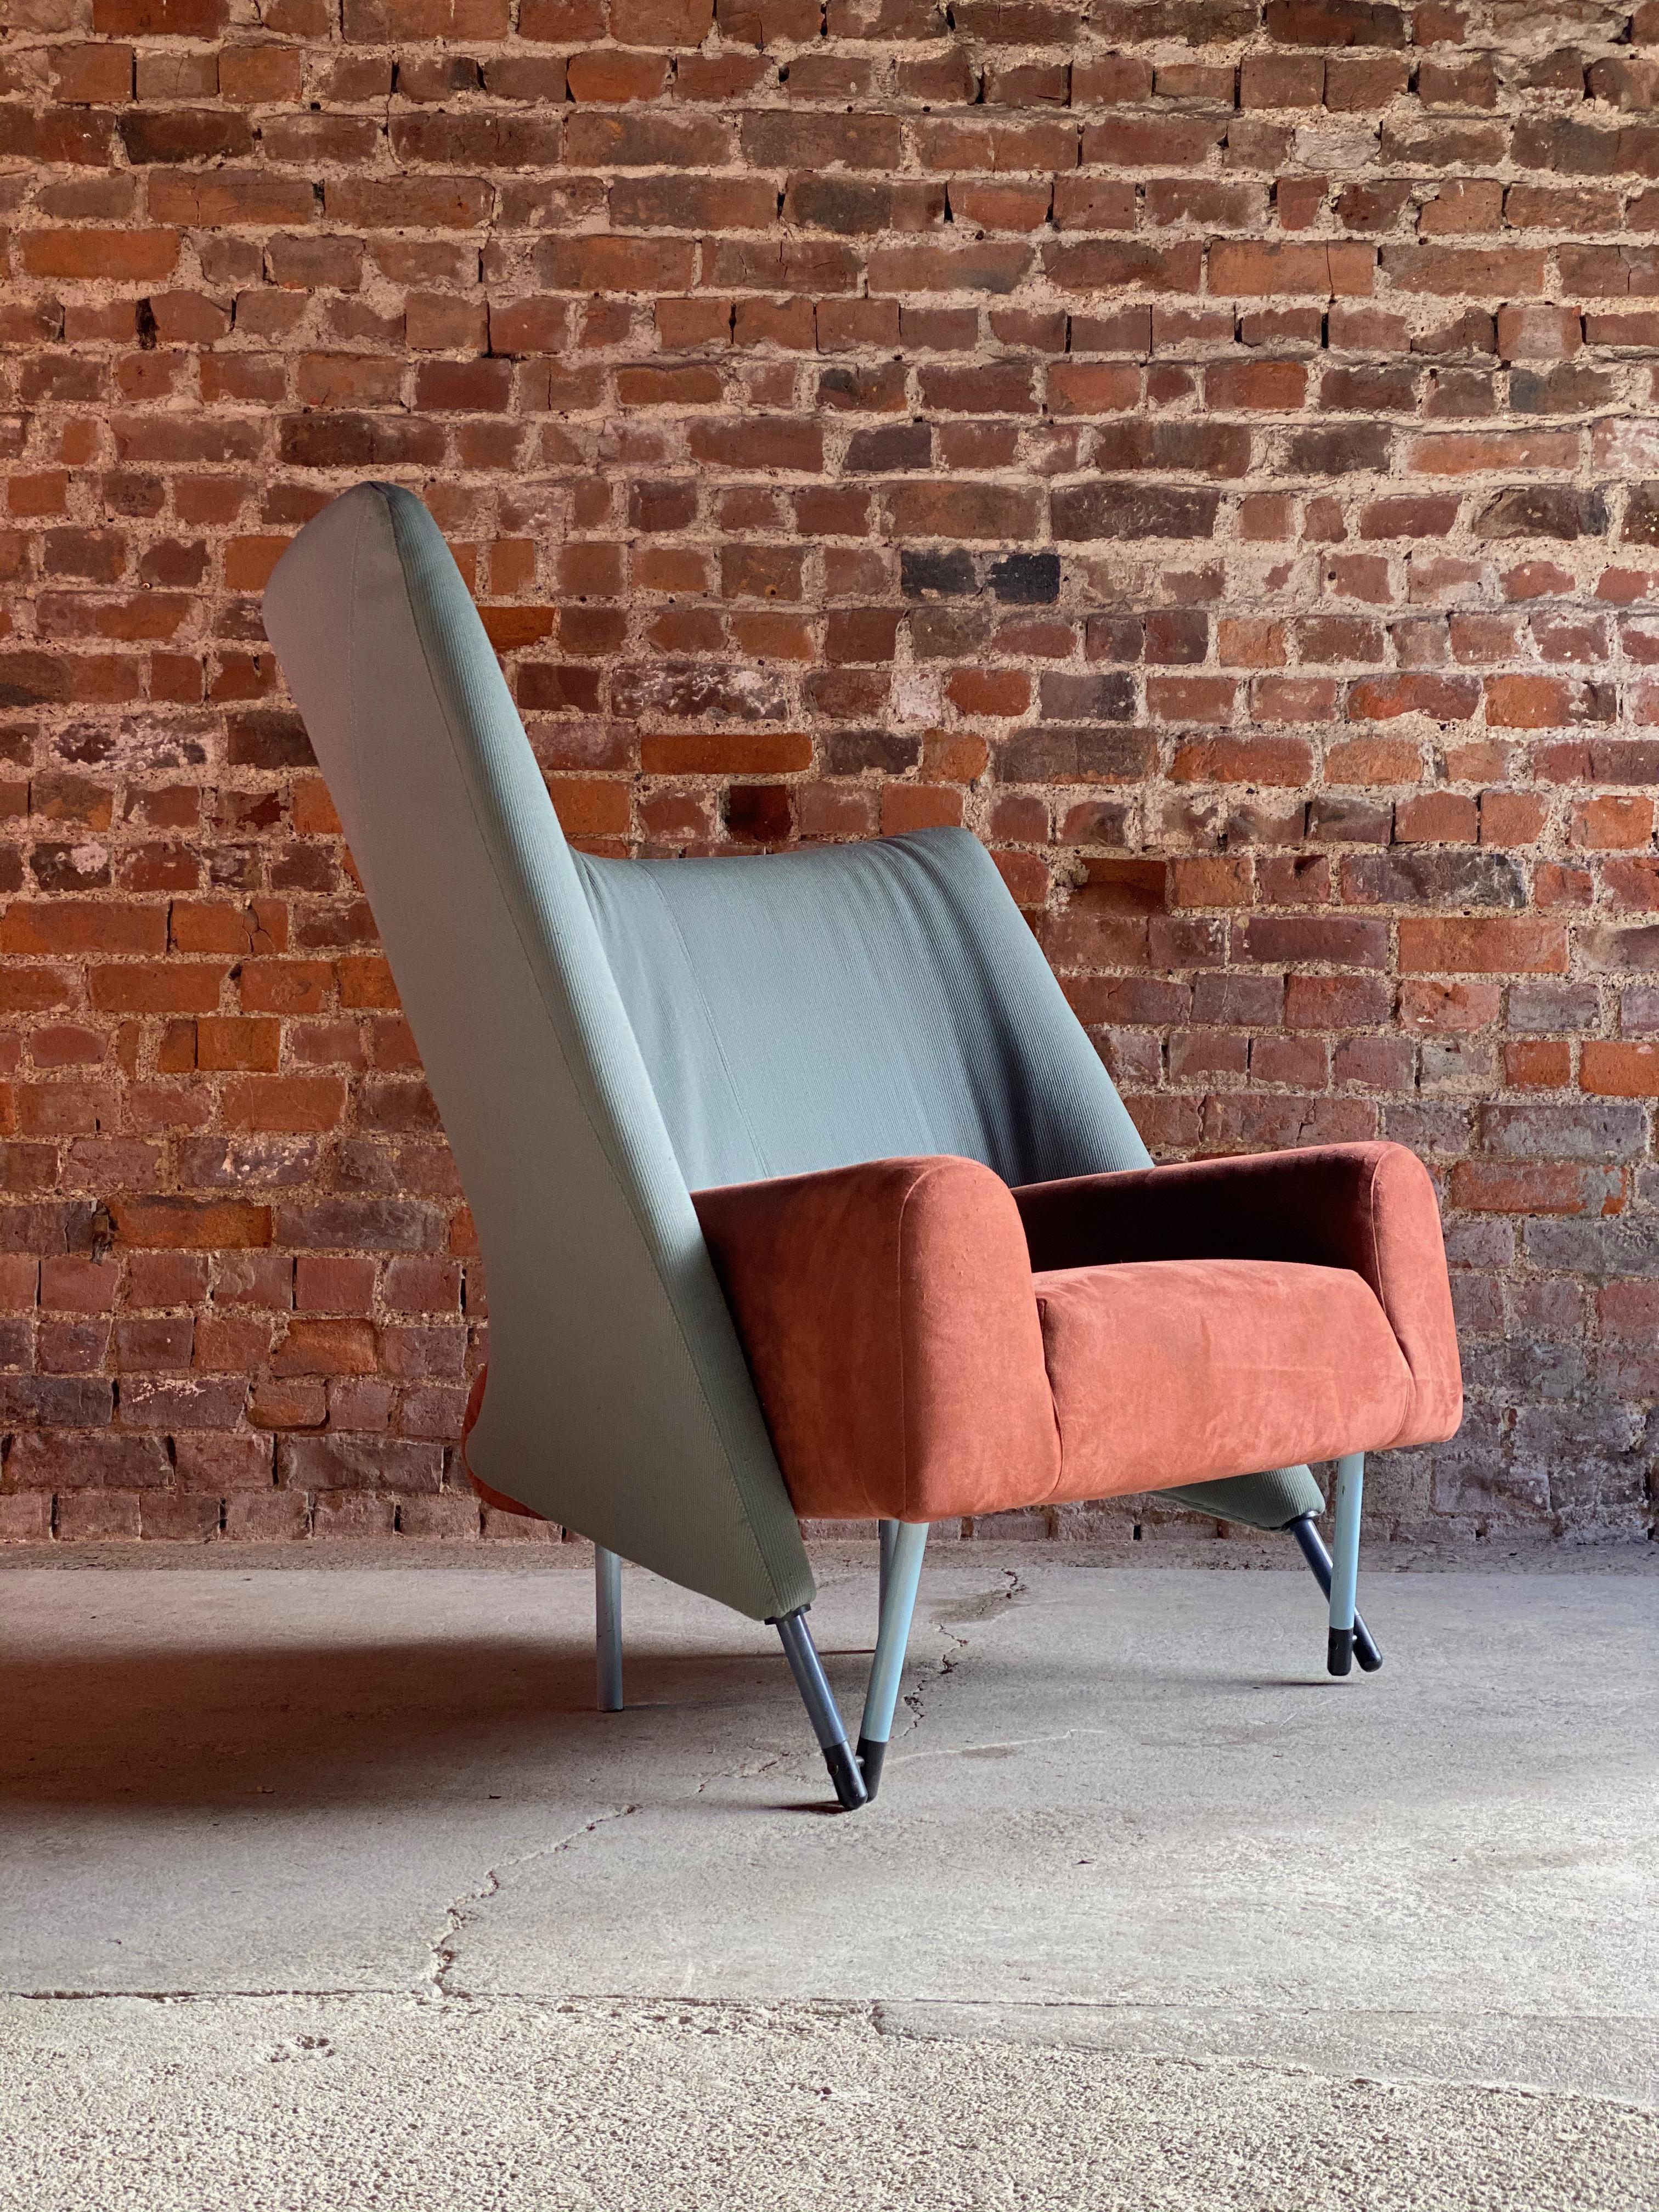 Paolo Deganello’s Torso 654 lounge chair by Centro Design e Comunicazione, produced by Cassina Italy circa 1982, the asymmetric shape perfectly captures the adventurous spirit of the ‘bang on trend’ Memphis design movement, this ‘Rock Star’ of a